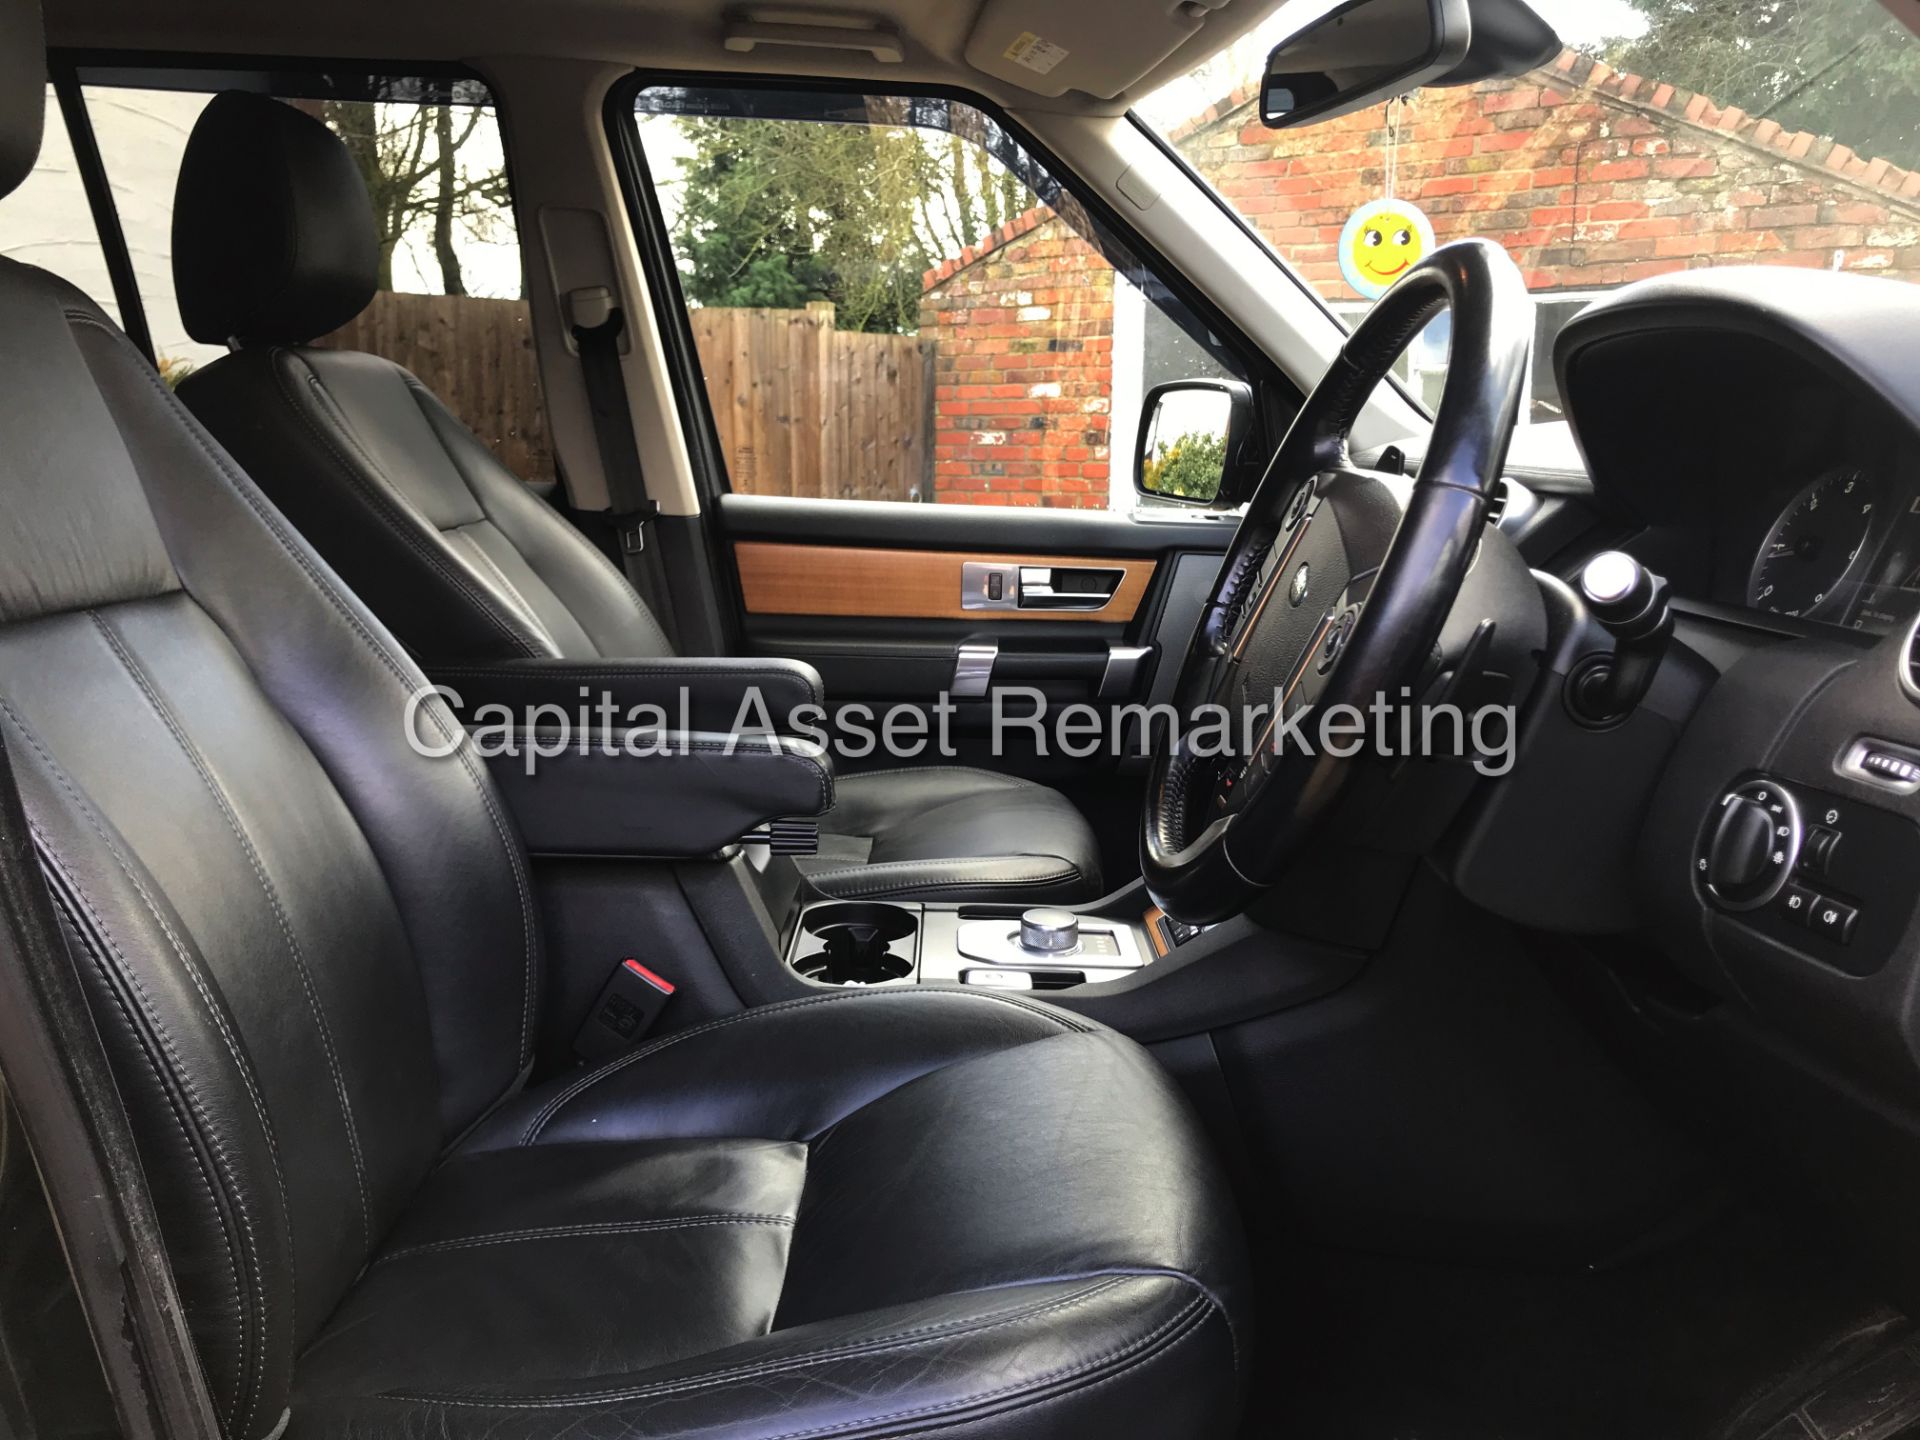 LAND ROVER DISCOVERY 4 "HSE" 3.0 SDV6 AUTOMATIC (13 REG) 7 SEATER - FULL LEATHER - SAT NAV *LOOK* - Image 9 of 25